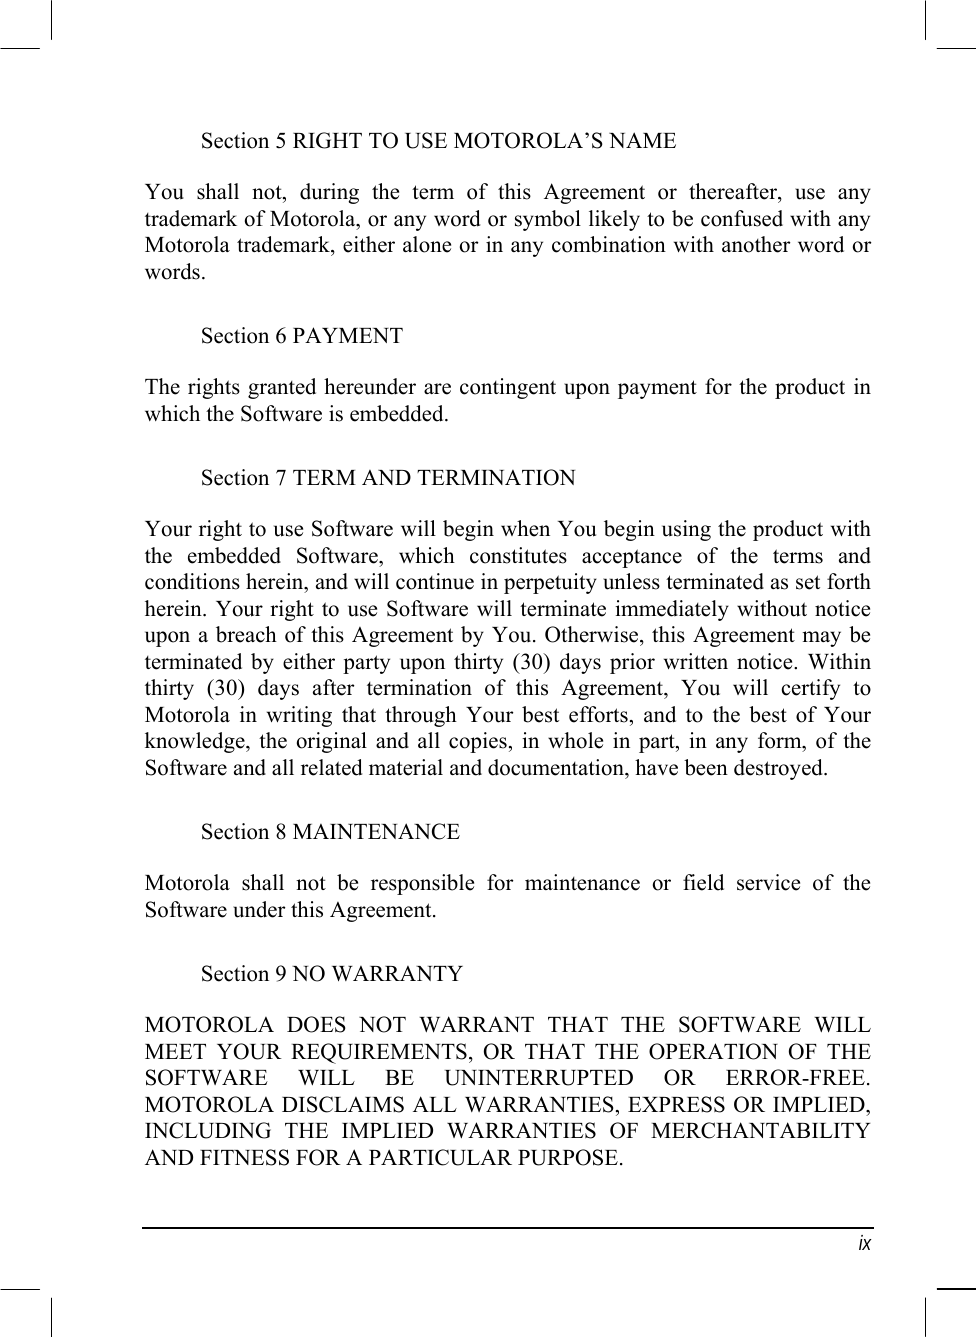   ix Section 5 RIGHT TO USE MOTOROLA’S NAME You shall not, during the term of this Agreement or thereafter, use any trademark of Motorola, or any word or symbol likely to be confused with any Motorola trademark, either alone or in any combination with another word or words. Section 6 PAYMENT The rights granted hereunder are contingent upon payment for the product in which the Software is embedded. Section 7 TERM AND TERMINATION Your right to use Software will begin when You begin using the product with the embedded Software, which constitutes acceptance of the terms and conditions herein, and will continue in perpetuity unless terminated as set forth herein. Your right to use Software will terminate immediately without notice upon a breach of this Agreement by You. Otherwise, this Agreement may be terminated by either party upon thirty (30) days prior written notice. Within thirty (30) days after termination of this Agreement, You will certify to Motorola in writing that through Your best efforts, and to the best of Your knowledge, the original and all copies, in whole in part, in any form, of the Software and all related material and documentation, have been destroyed. Section 8 MAINTENANCE Motorola shall not be responsible for maintenance or field service of the Software under this Agreement. Section 9 NO WARRANTY MOTOROLA DOES NOT WARRANT THAT THE SOFTWARE WILL MEET YOUR REQUIREMENTS, OR THAT THE OPERATION OF THE SOFTWARE WILL BE UNINTERRUPTED OR ERROR-FREE. MOTOROLA DISCLAIMS ALL WARRANTIES, EXPRESS OR IMPLIED, INCLUDING THE IMPLIED WARRANTIES OF MERCHANTABILITY AND FITNESS FOR A PARTICULAR PURPOSE. 